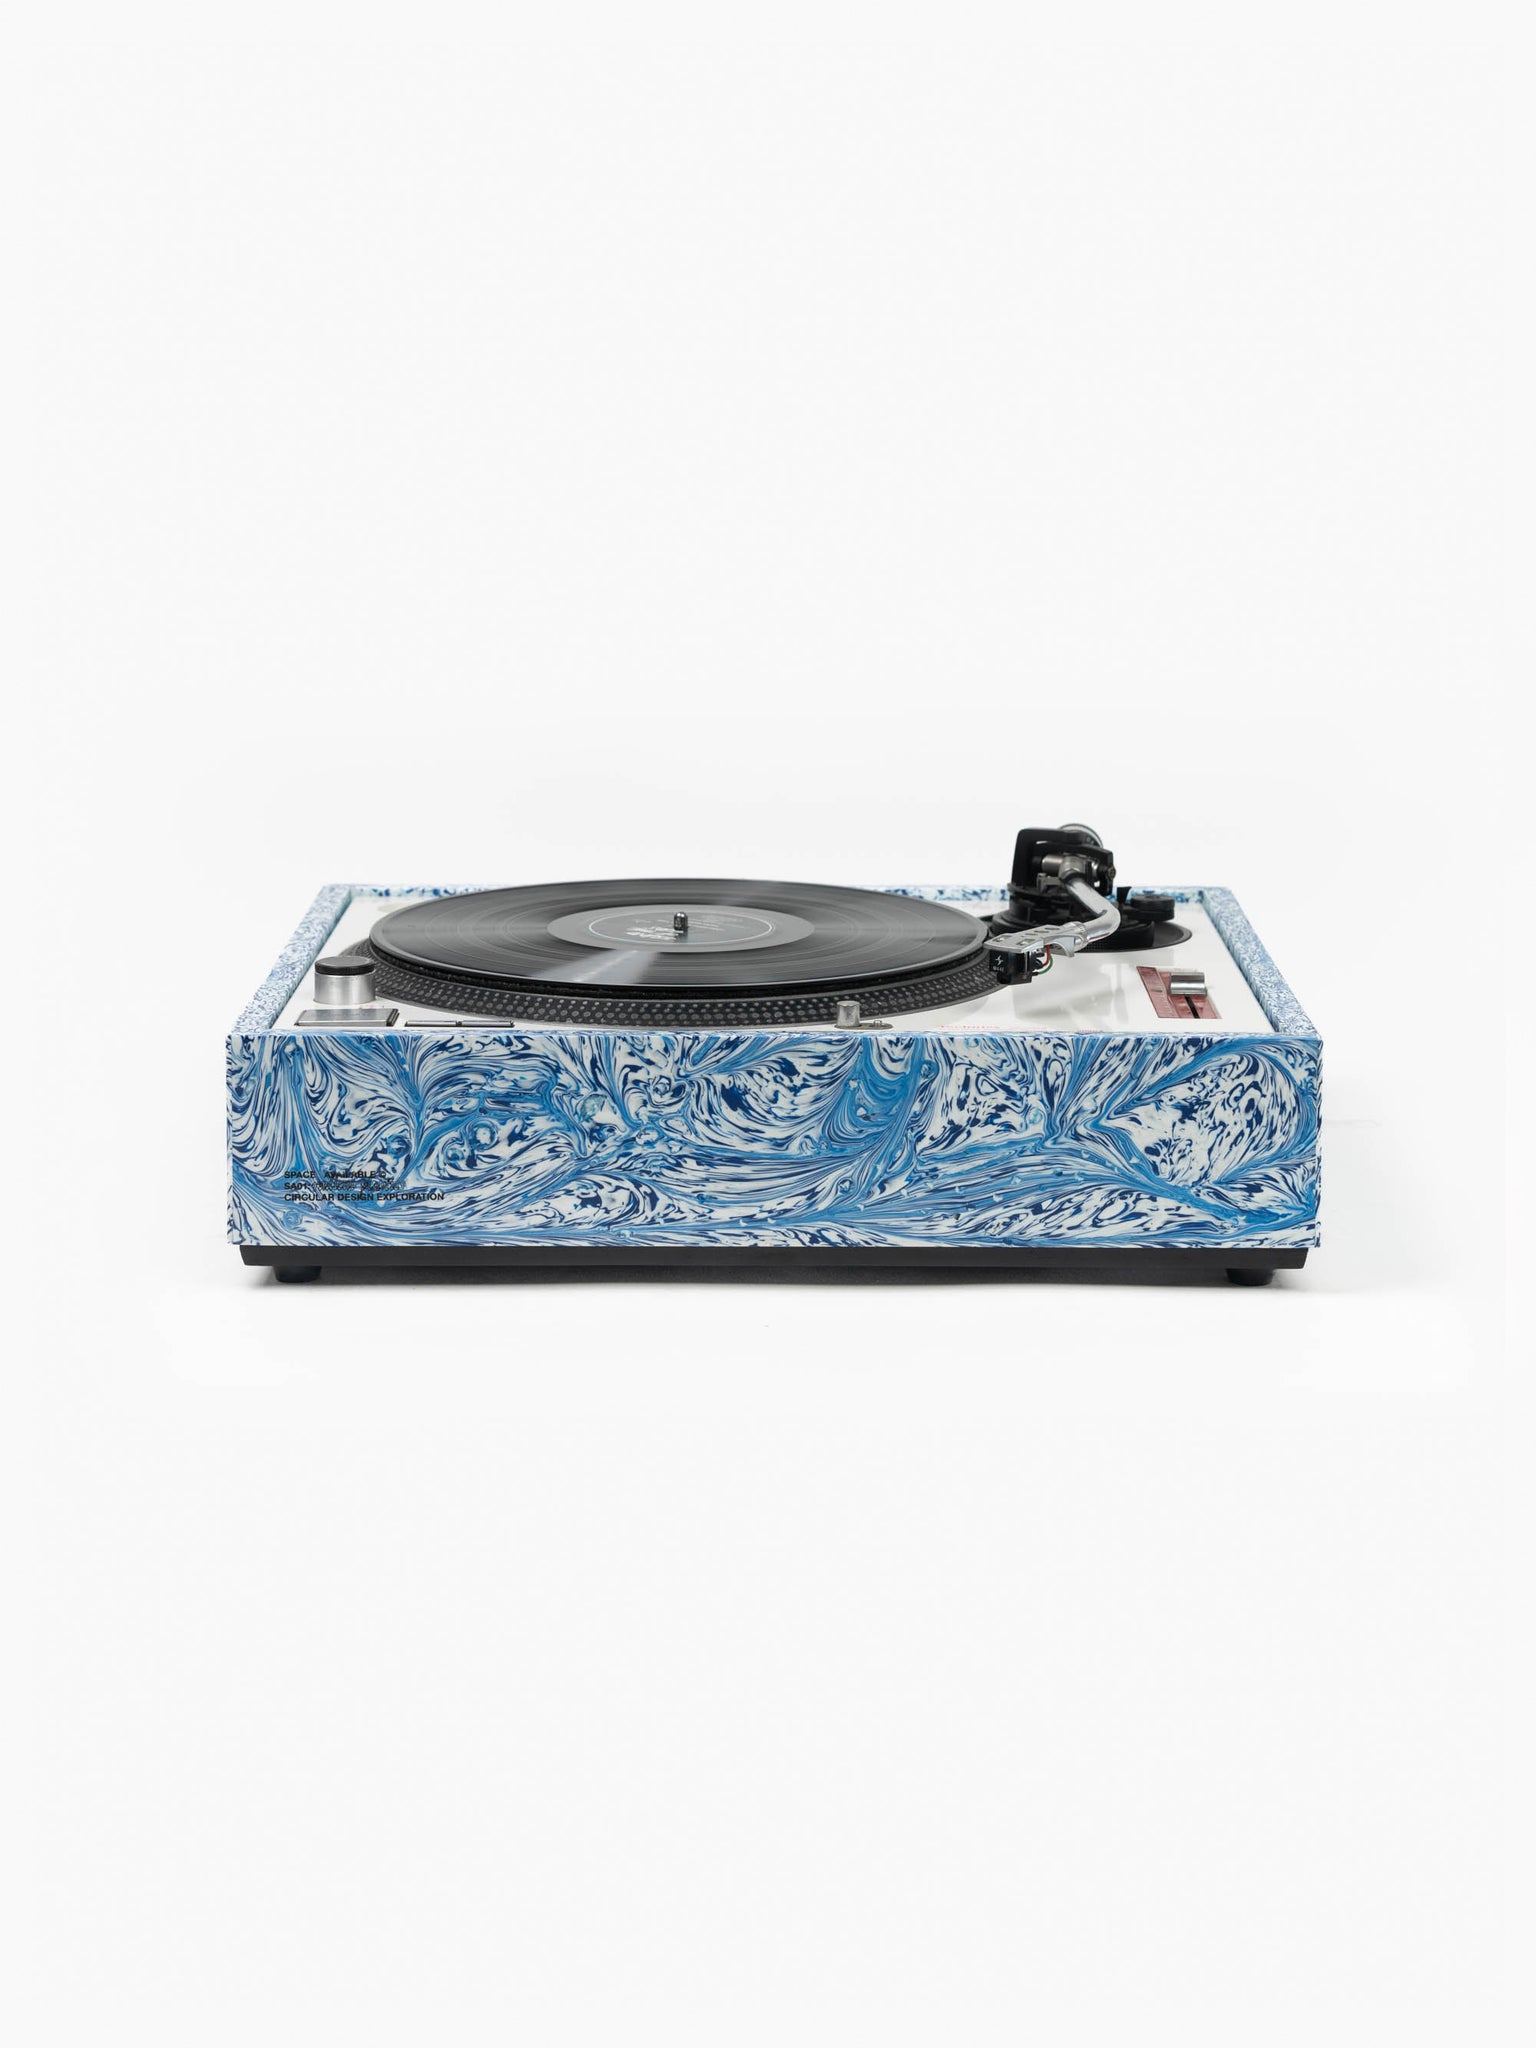 Turntable Casing Blue